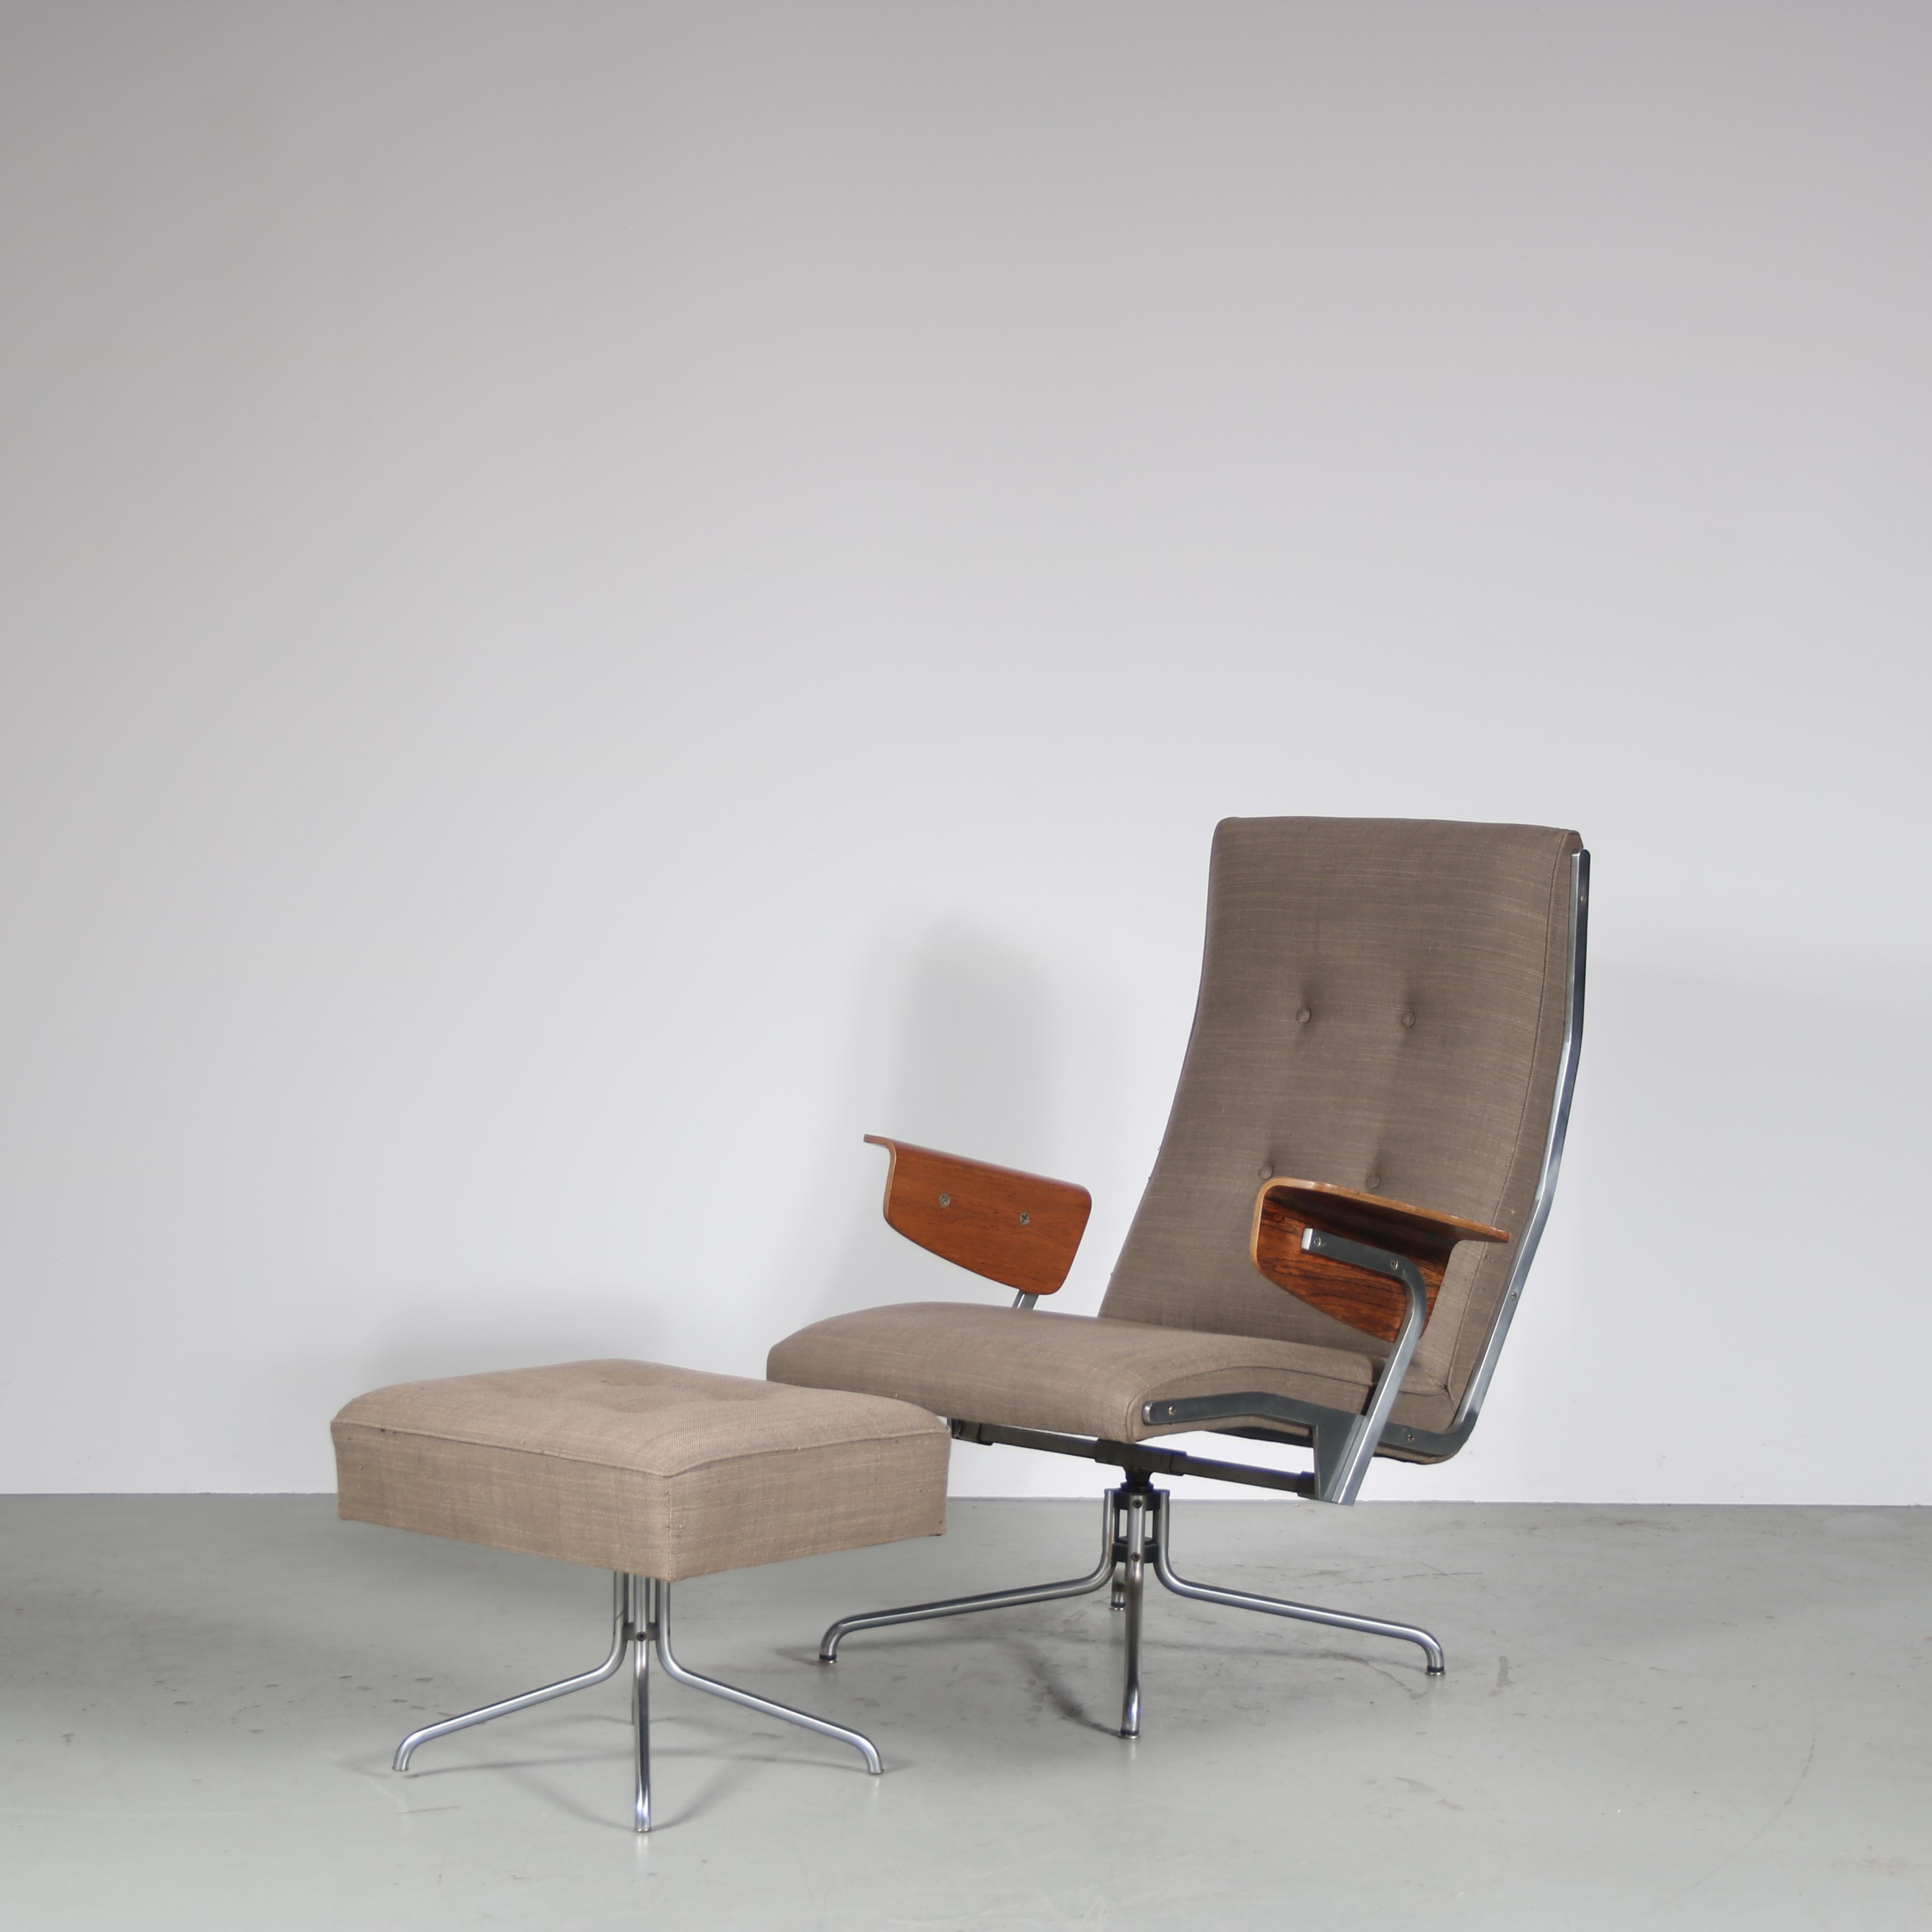 

A remarkable lounge chair and hocker set from the 1960s, showcasing exquisite design and craftsmanship!

This exceptional lounge chair exudes elegance with its chrome metal swivel base that allows for effortless movement. The grey/beige fabric